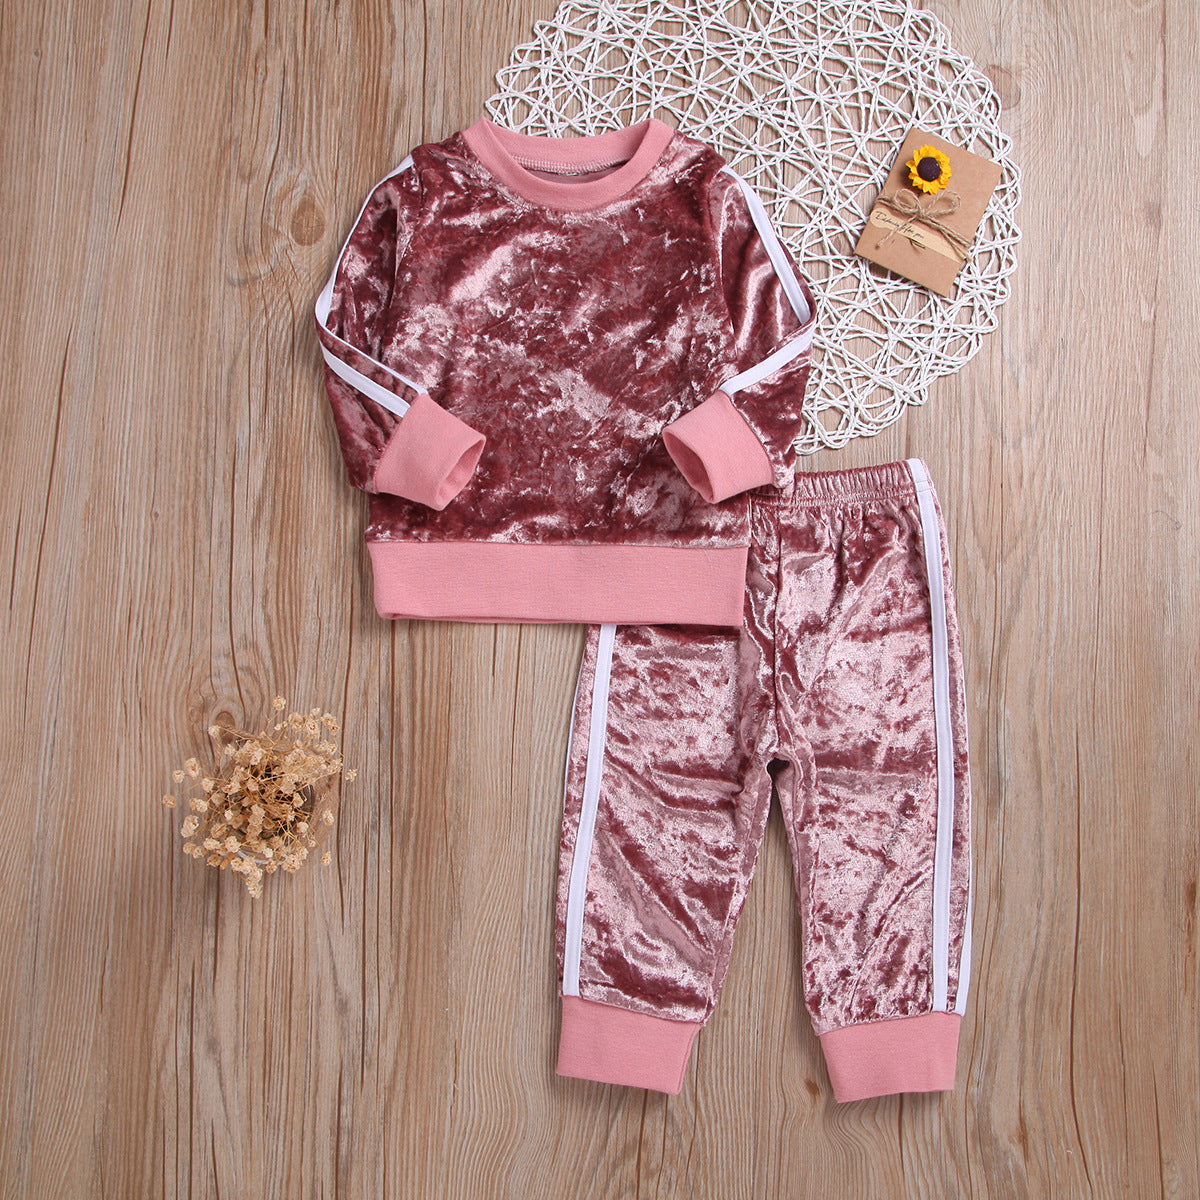 Candy-colored children's clothing